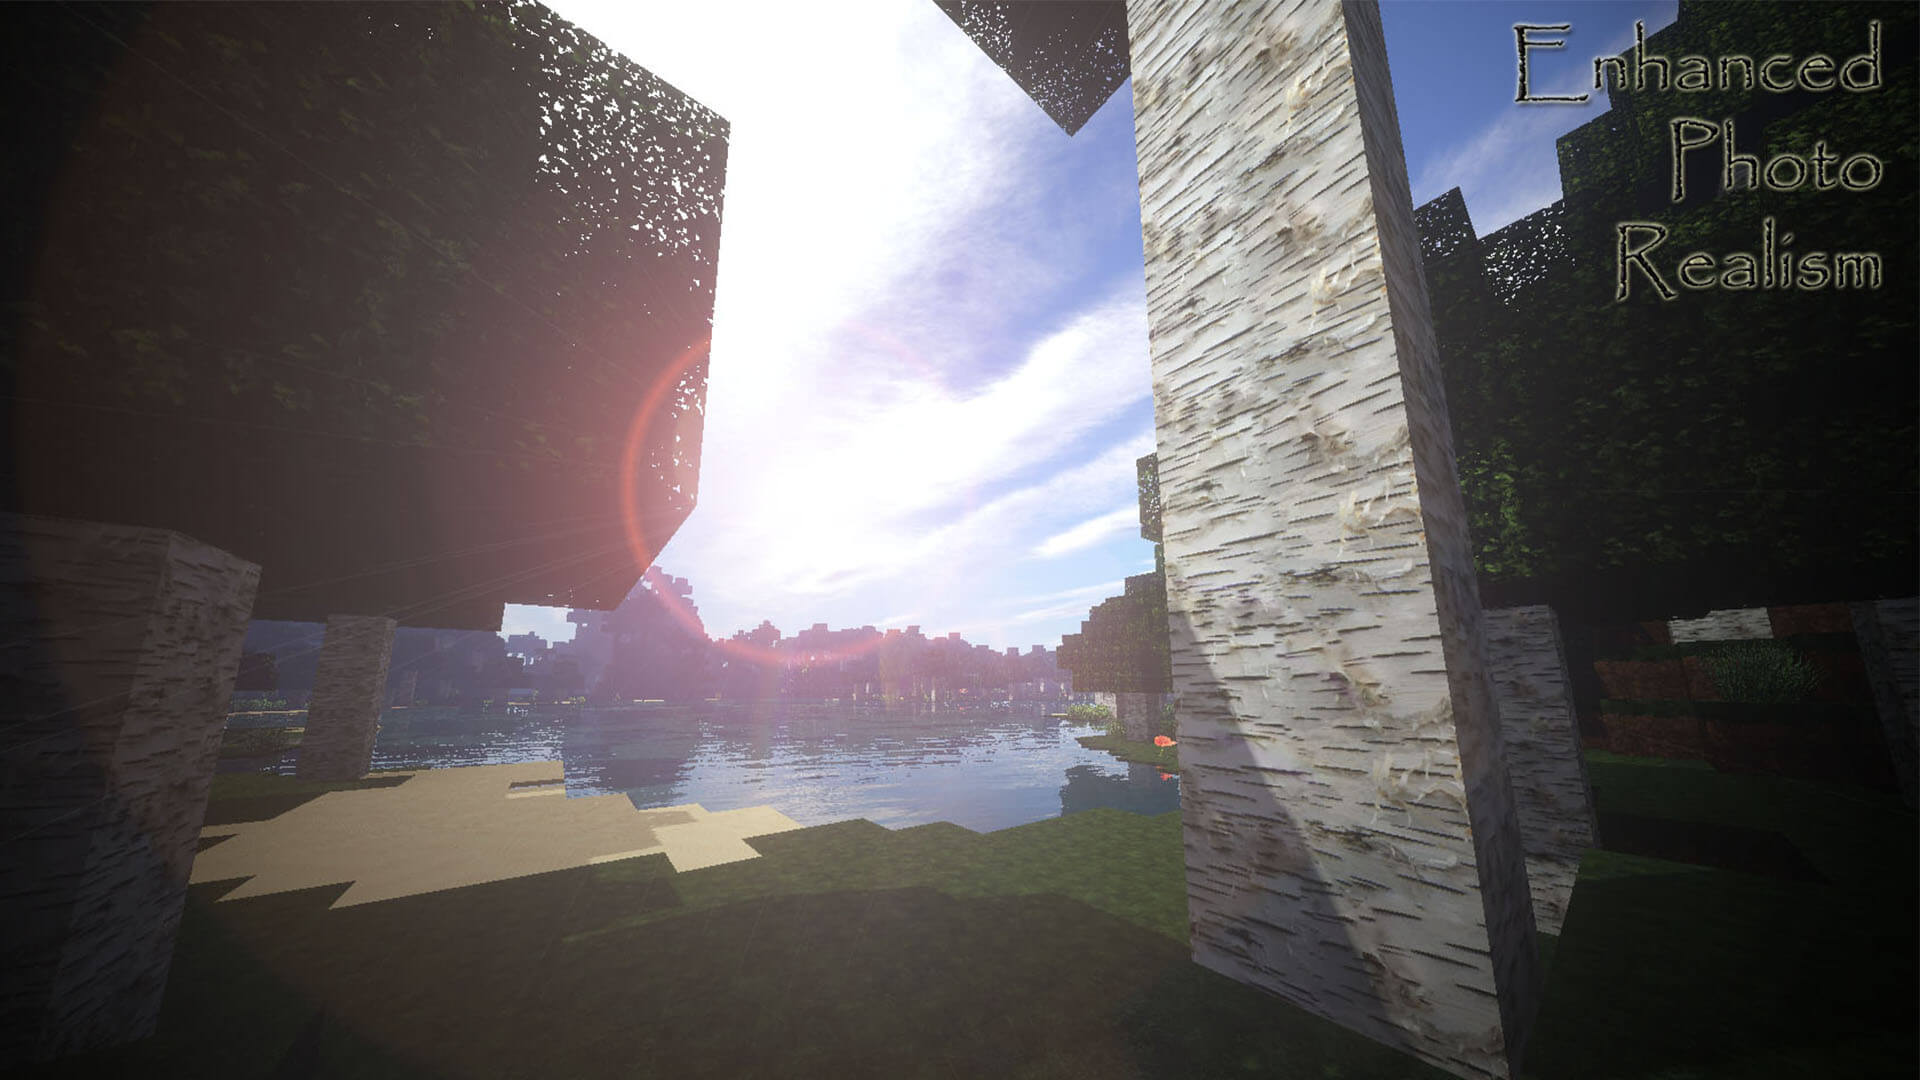 LB Photo Realism Texture Pack Image 1